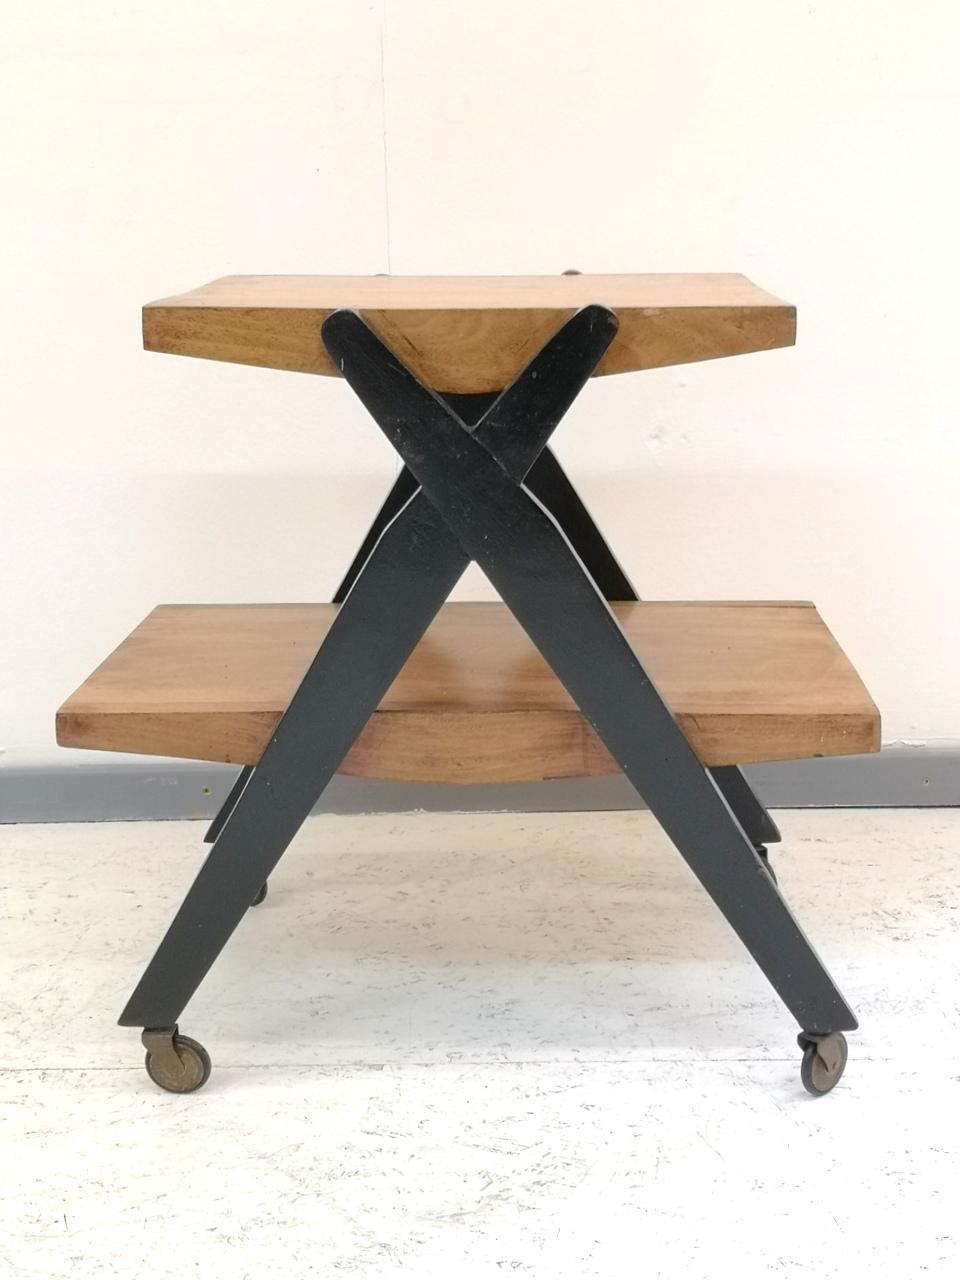 This walnut wood veneer bar cart was made in 1970s. It has painted black crossing legs, and runs on wheels. Generally good condition, but some scuffs and fading is visible on the veneer.